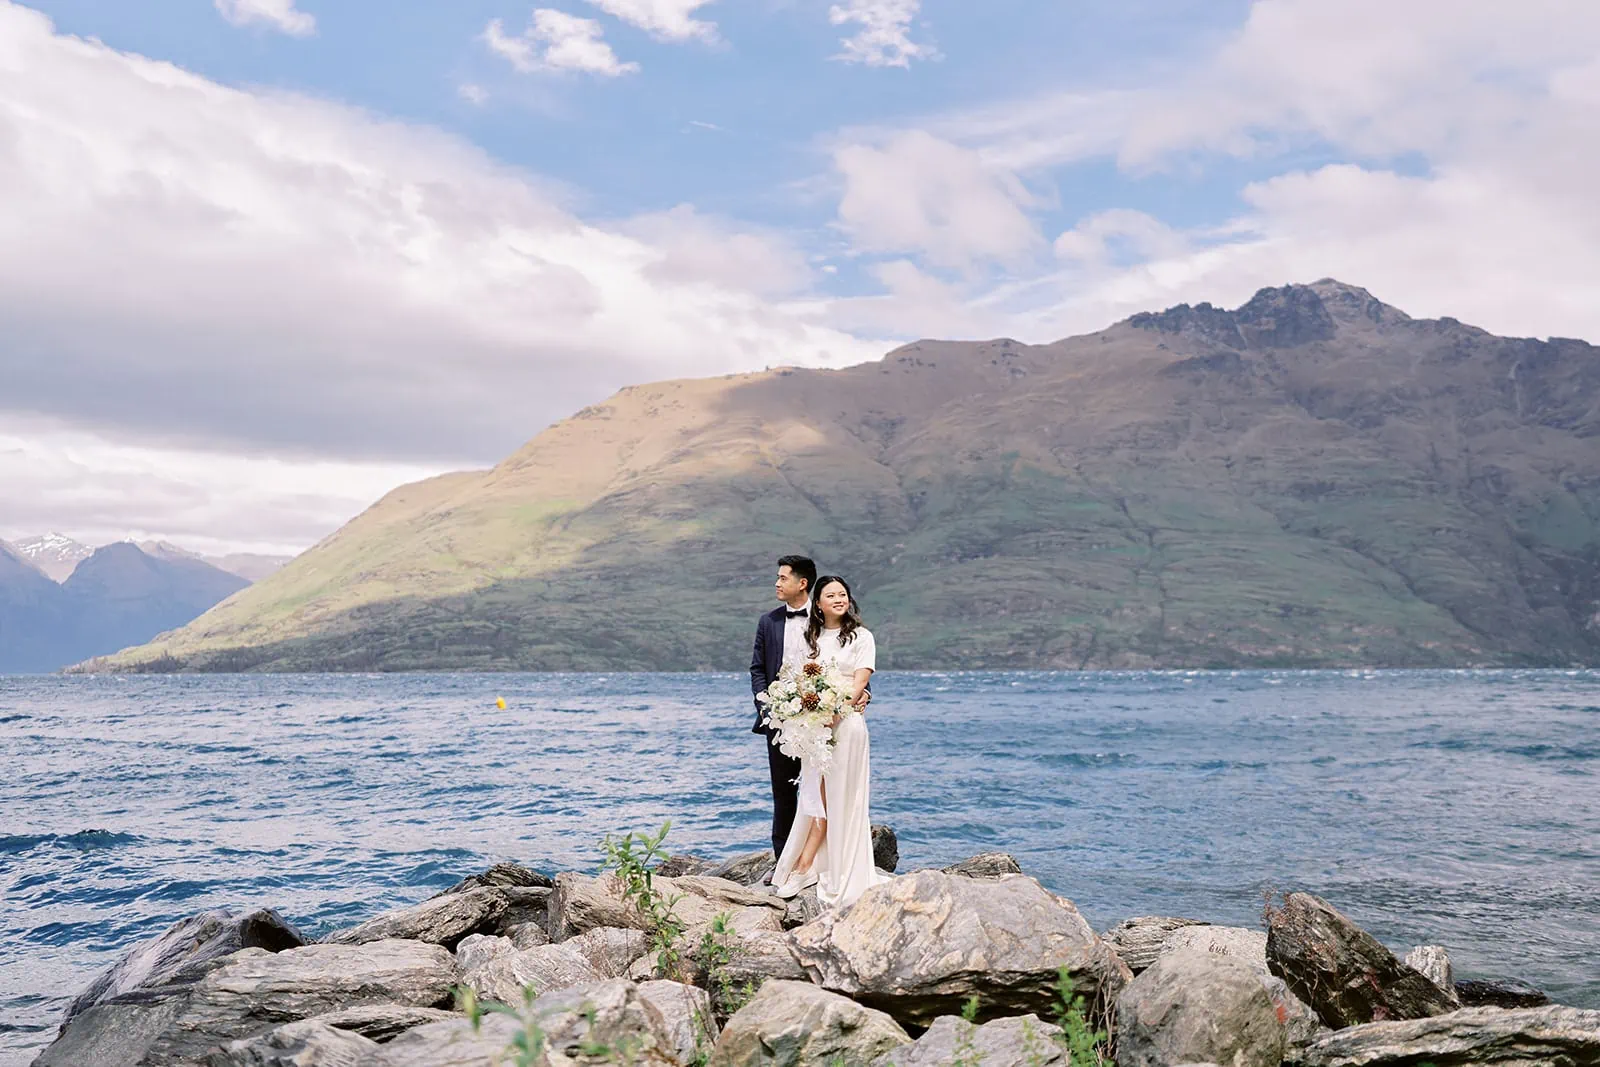 Queenstown Elopement Heli Wedding Photographer クイーンズタウン結婚式 | A romantic pre-wedding photoshoot of a man and woman standing on rocks by water and mountains.